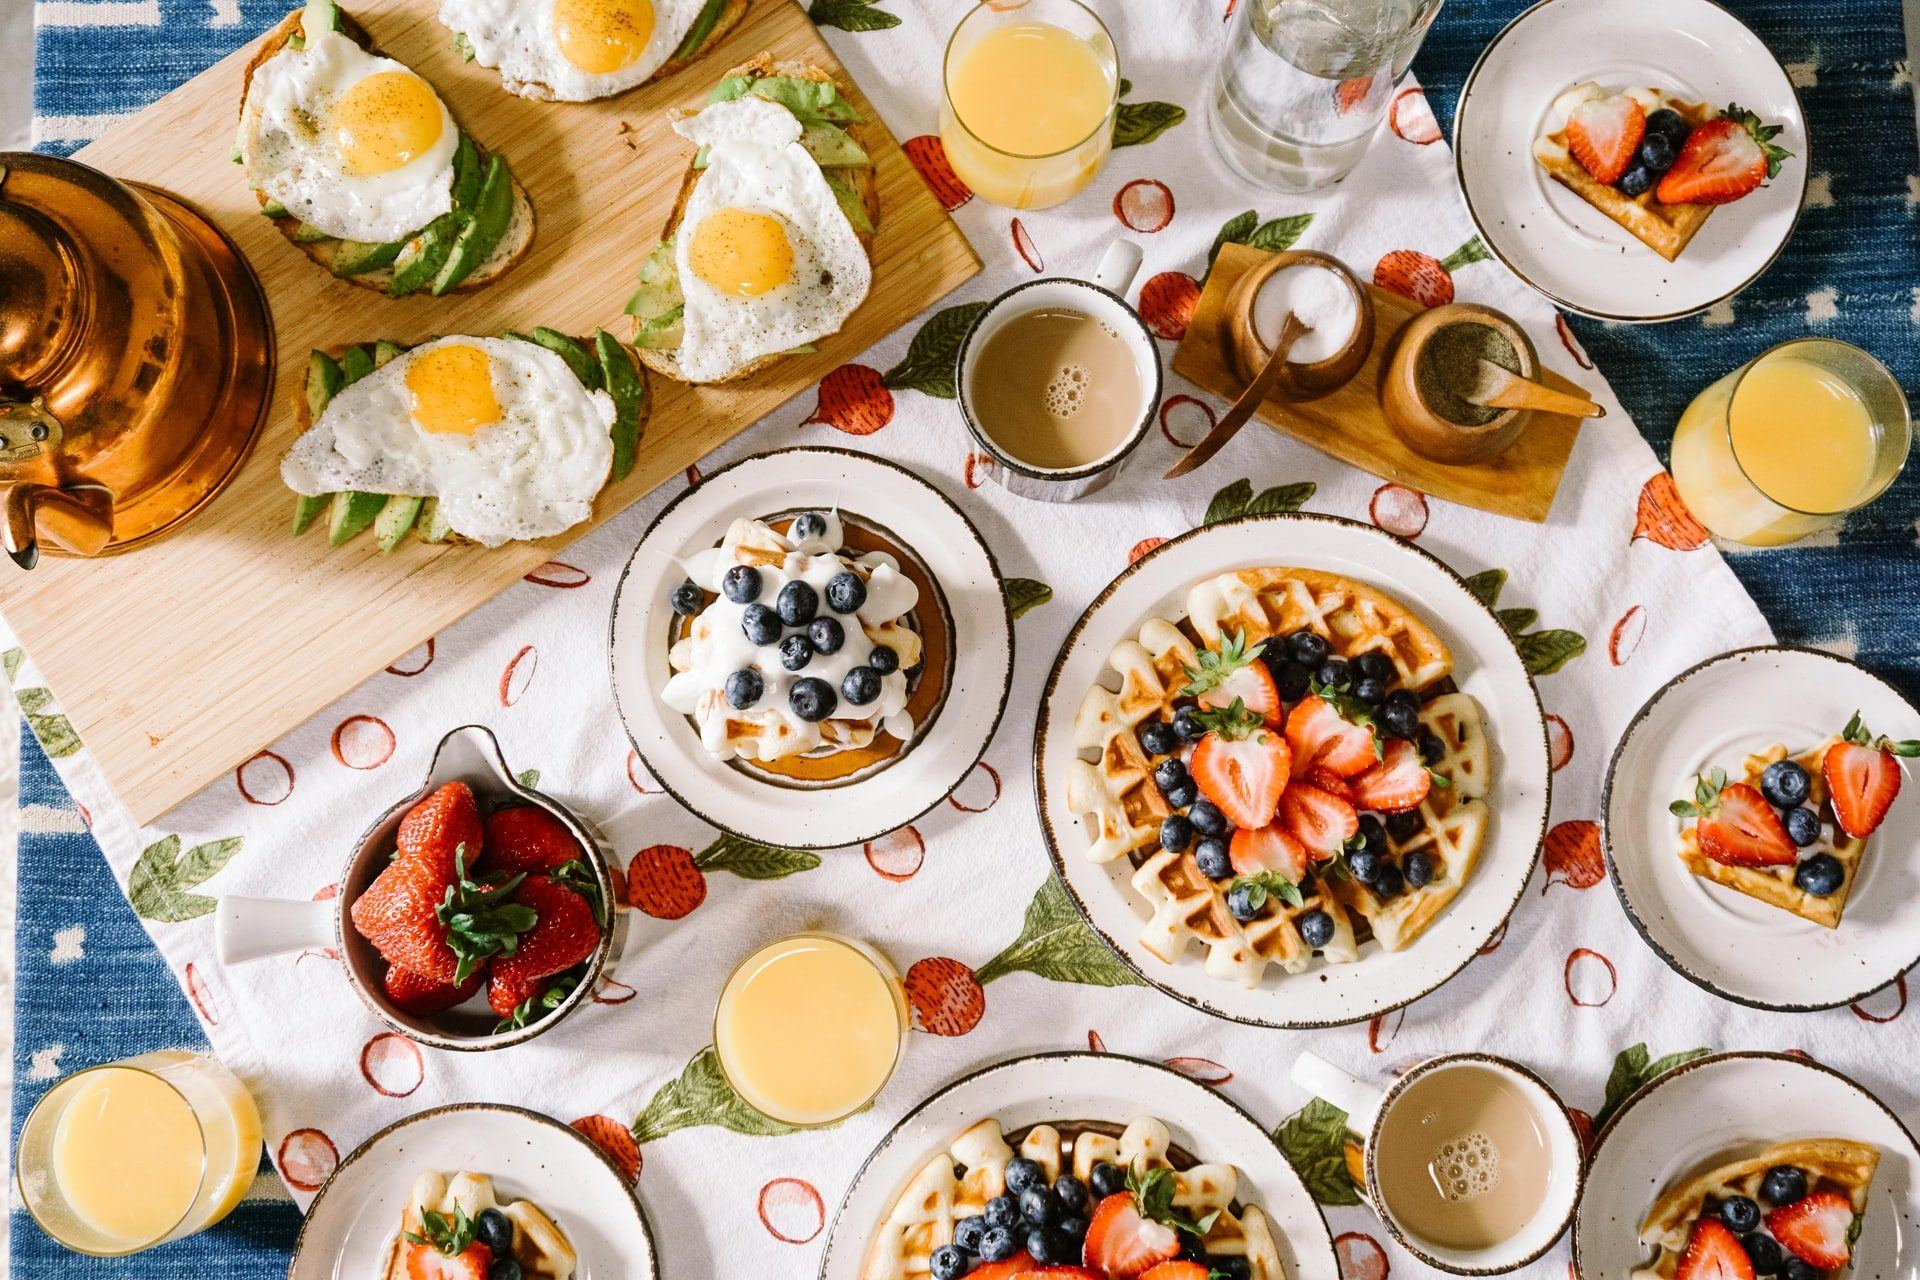 Skipped Breakfast? You Could be Stripping Your Body Of Vital Nutrients